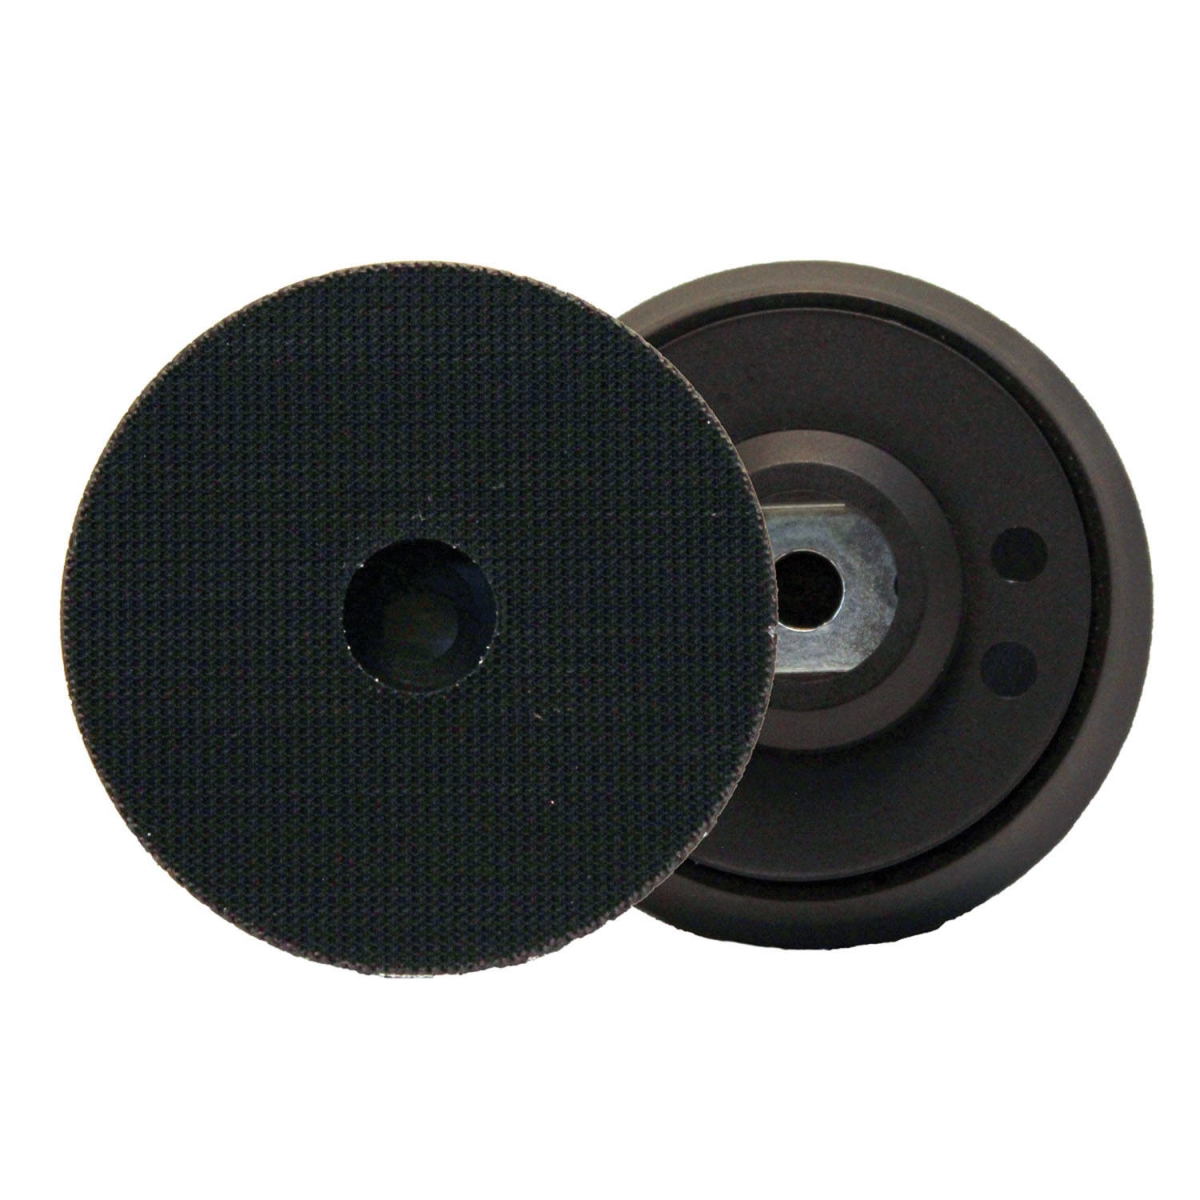 Pst-810150 Flex Backing Plate For Pad - 6.5 In.